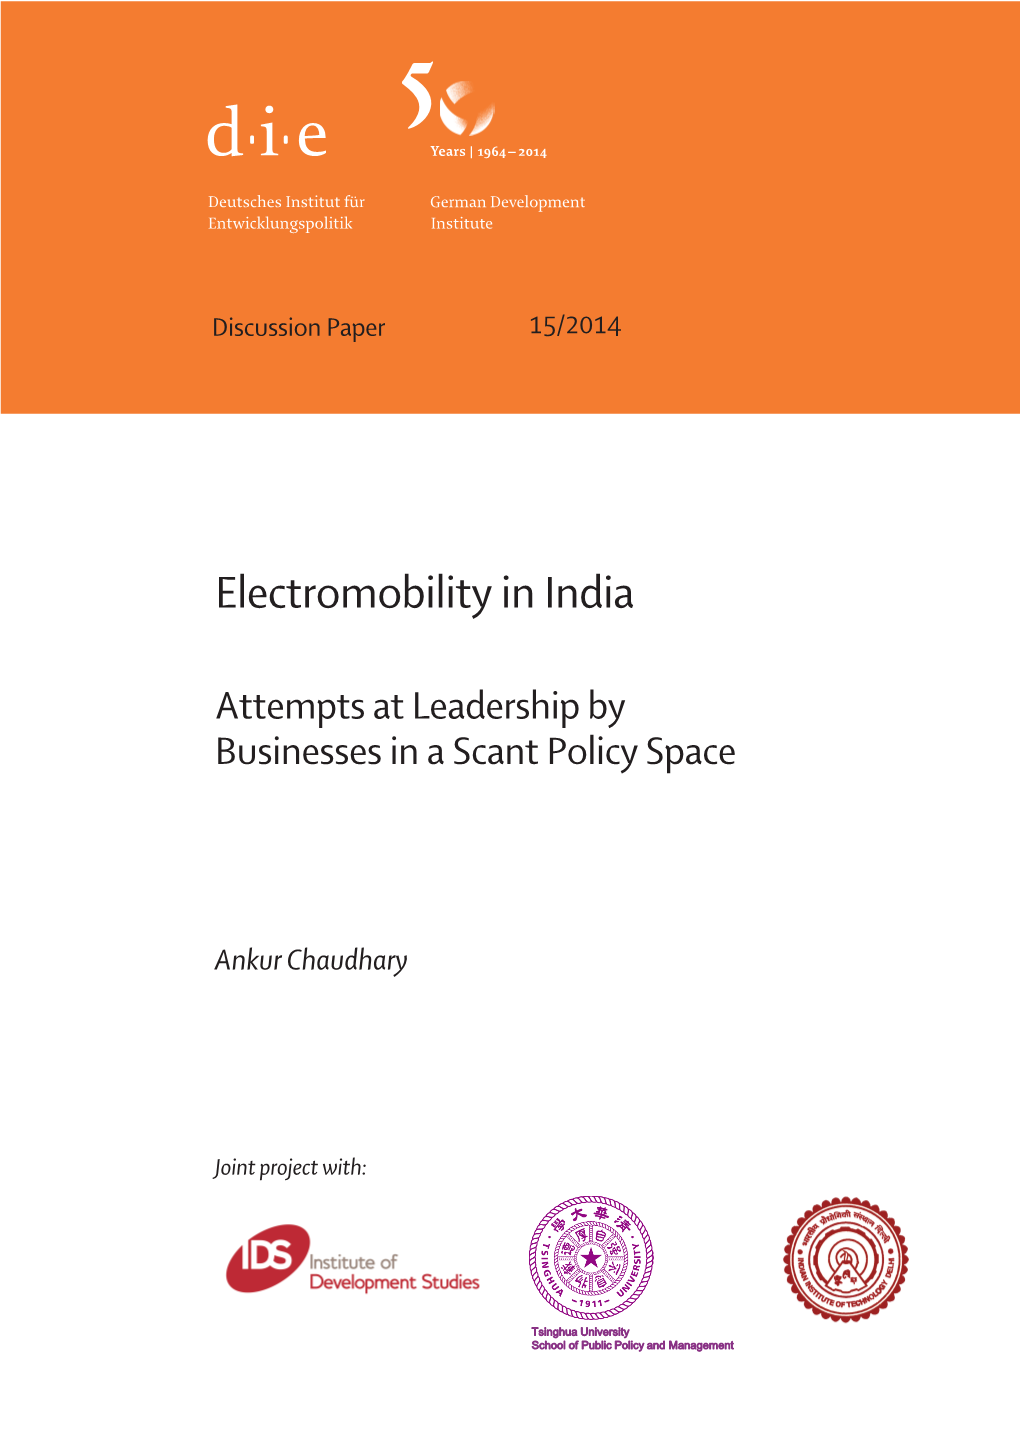 Electromobility in India